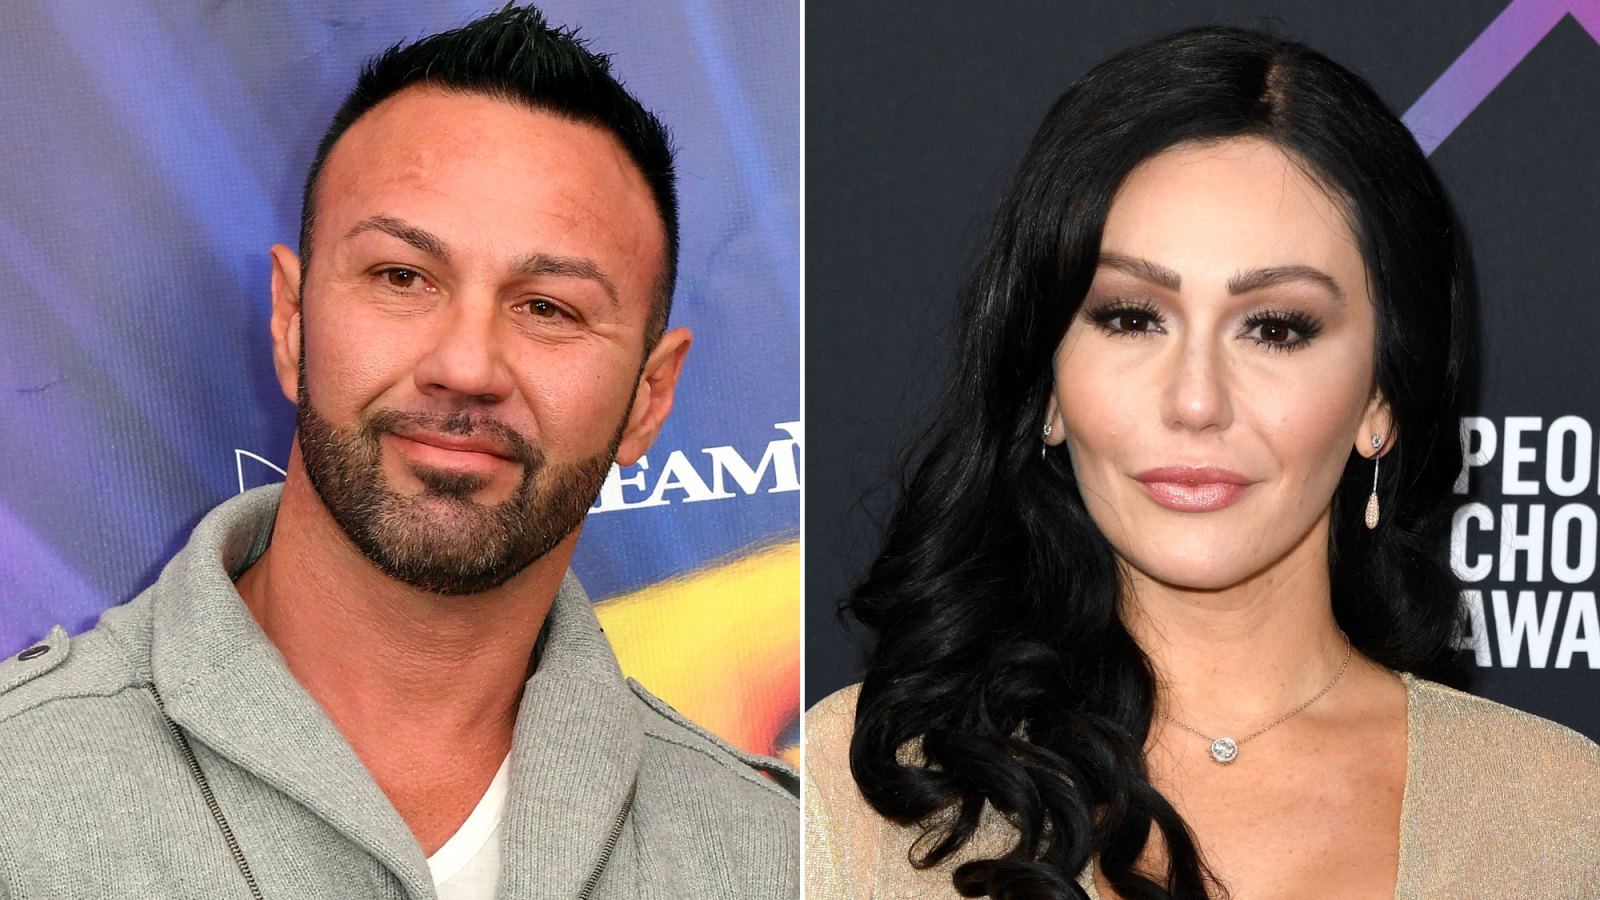 JWoww’s Estranged Husband Roger Mathews Spends Day With Their Kids